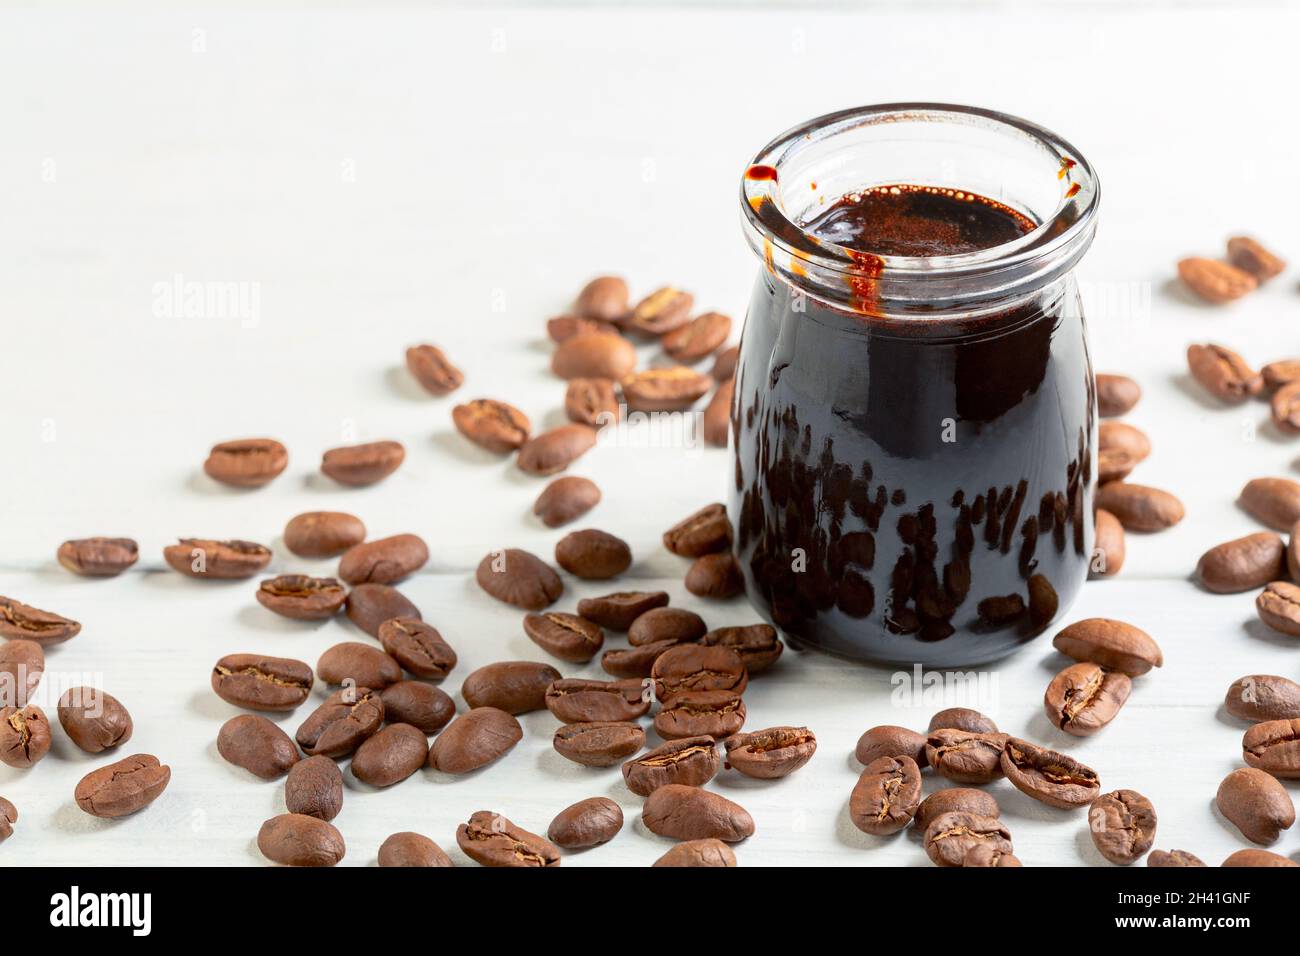 Bottle with a coffee extract. Stock Photo